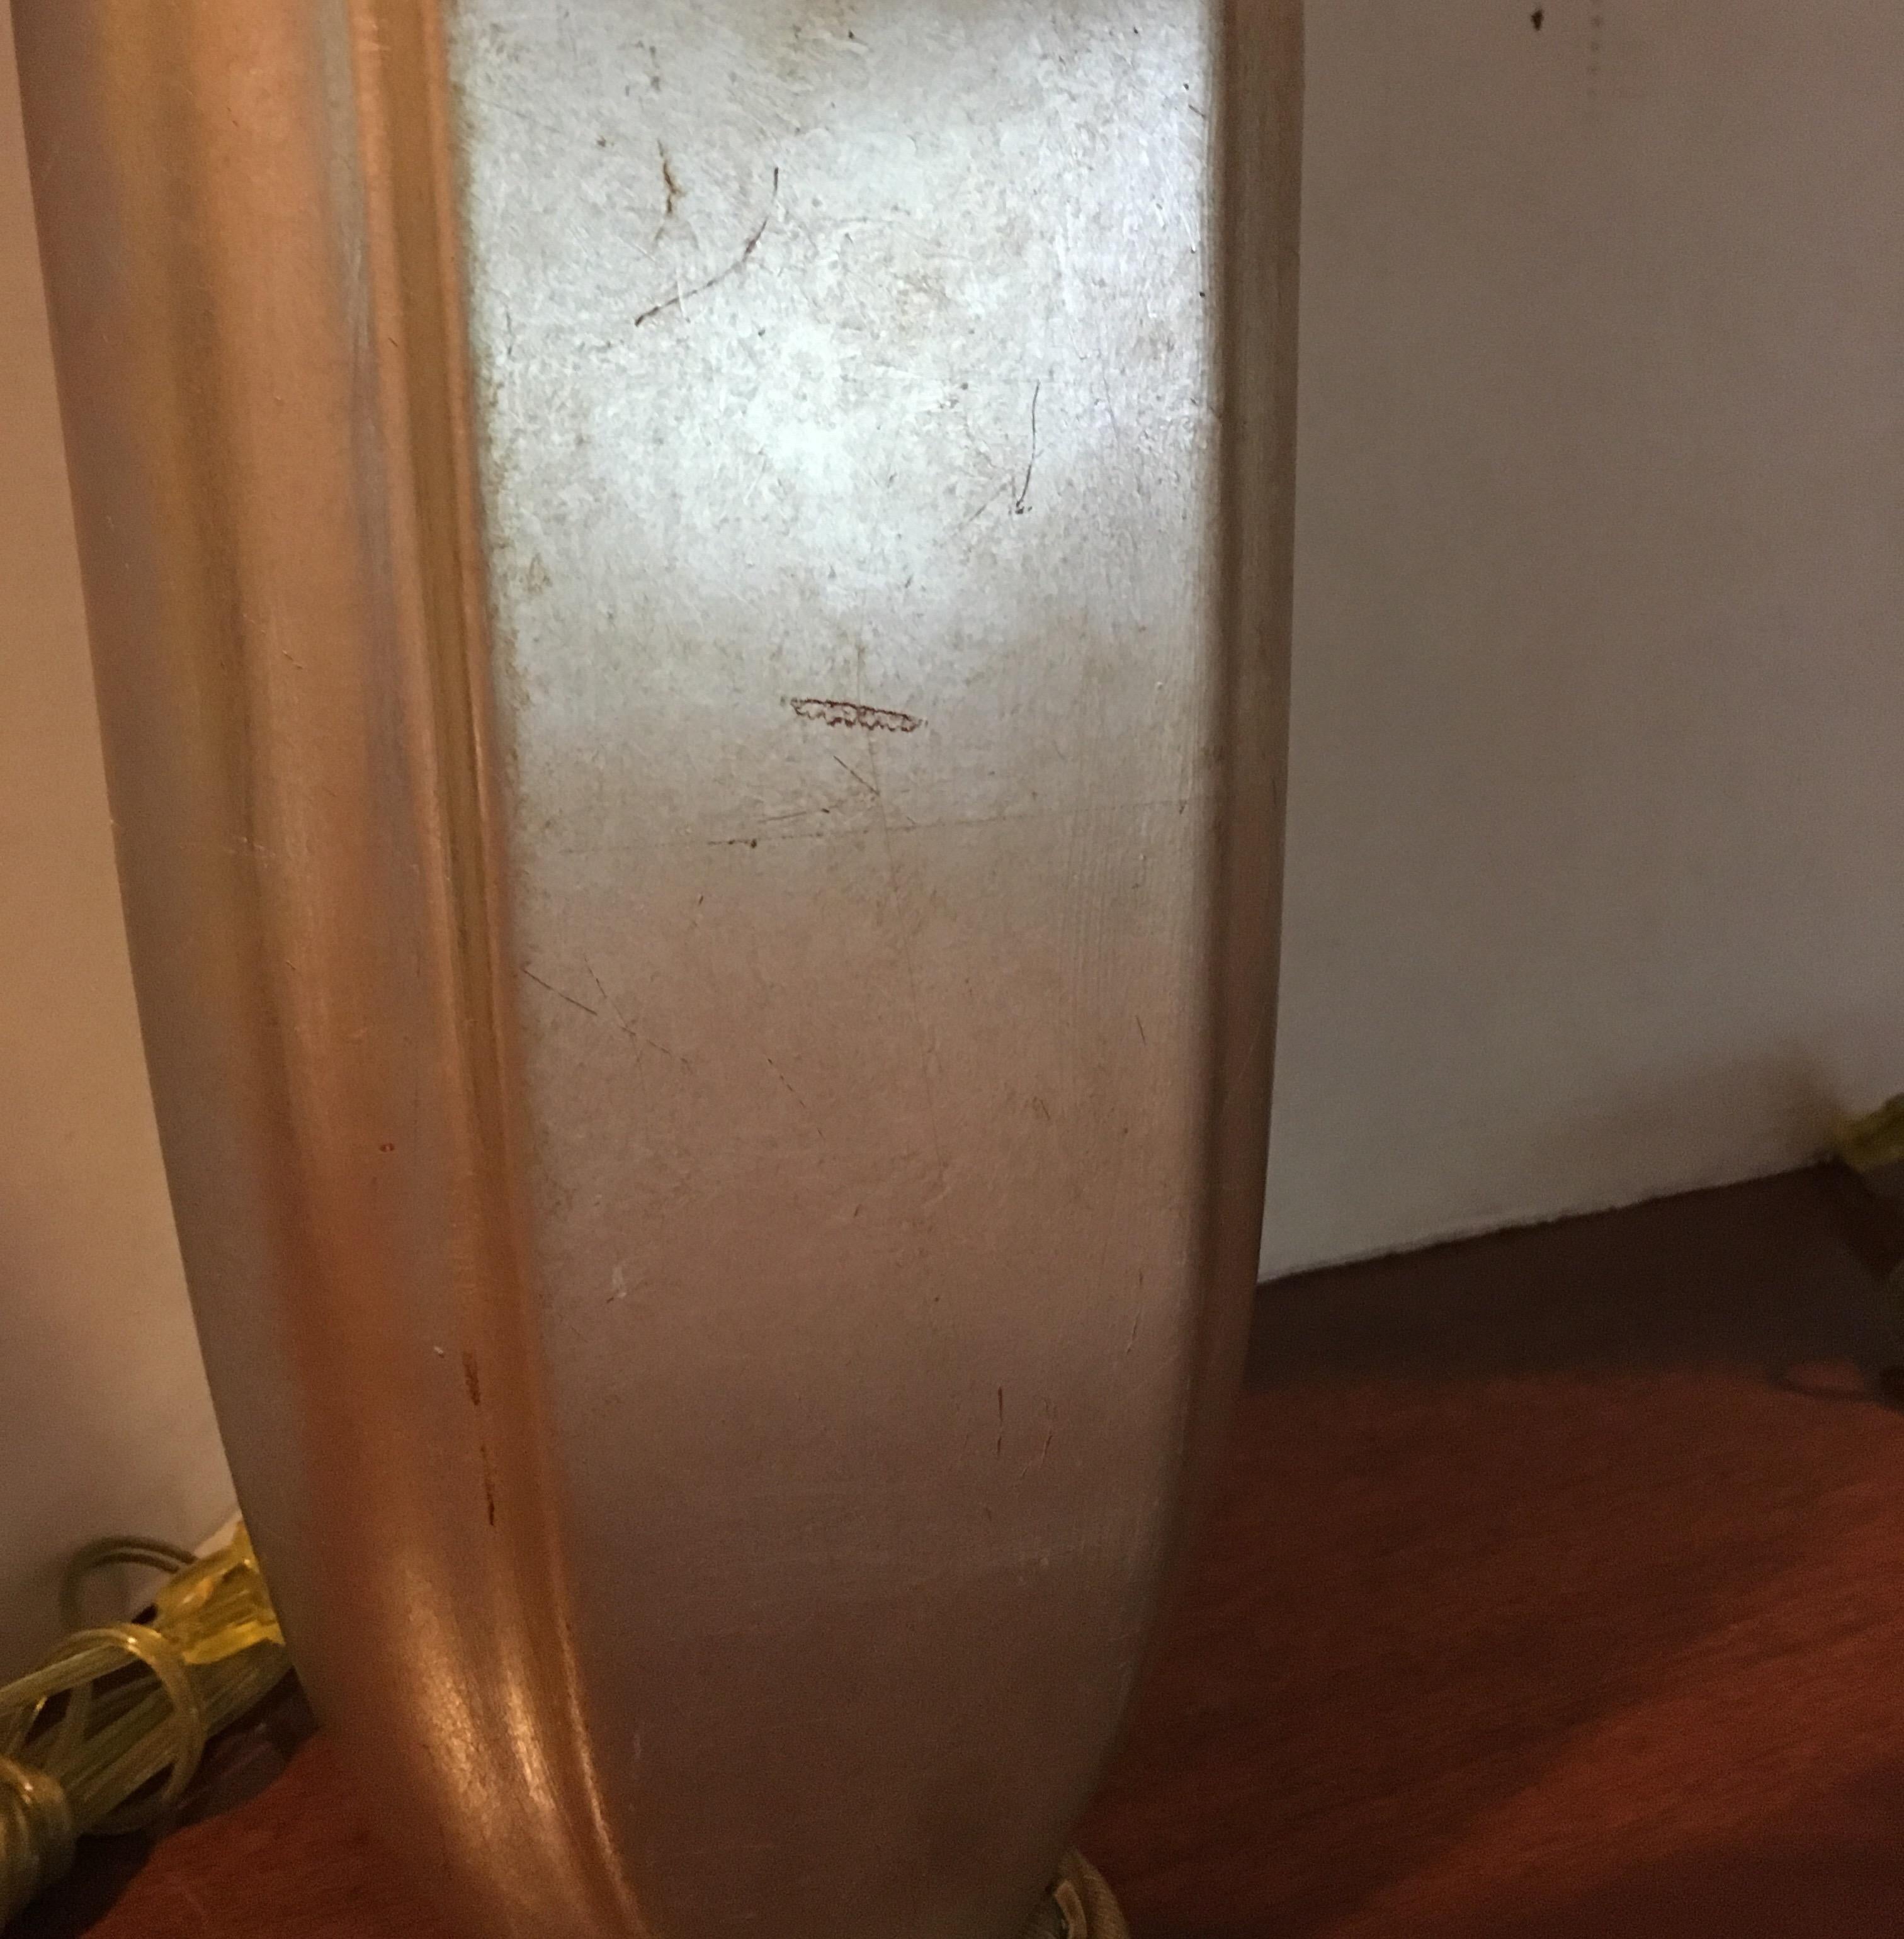 Brass Pair of Chapman Lamps For Sale